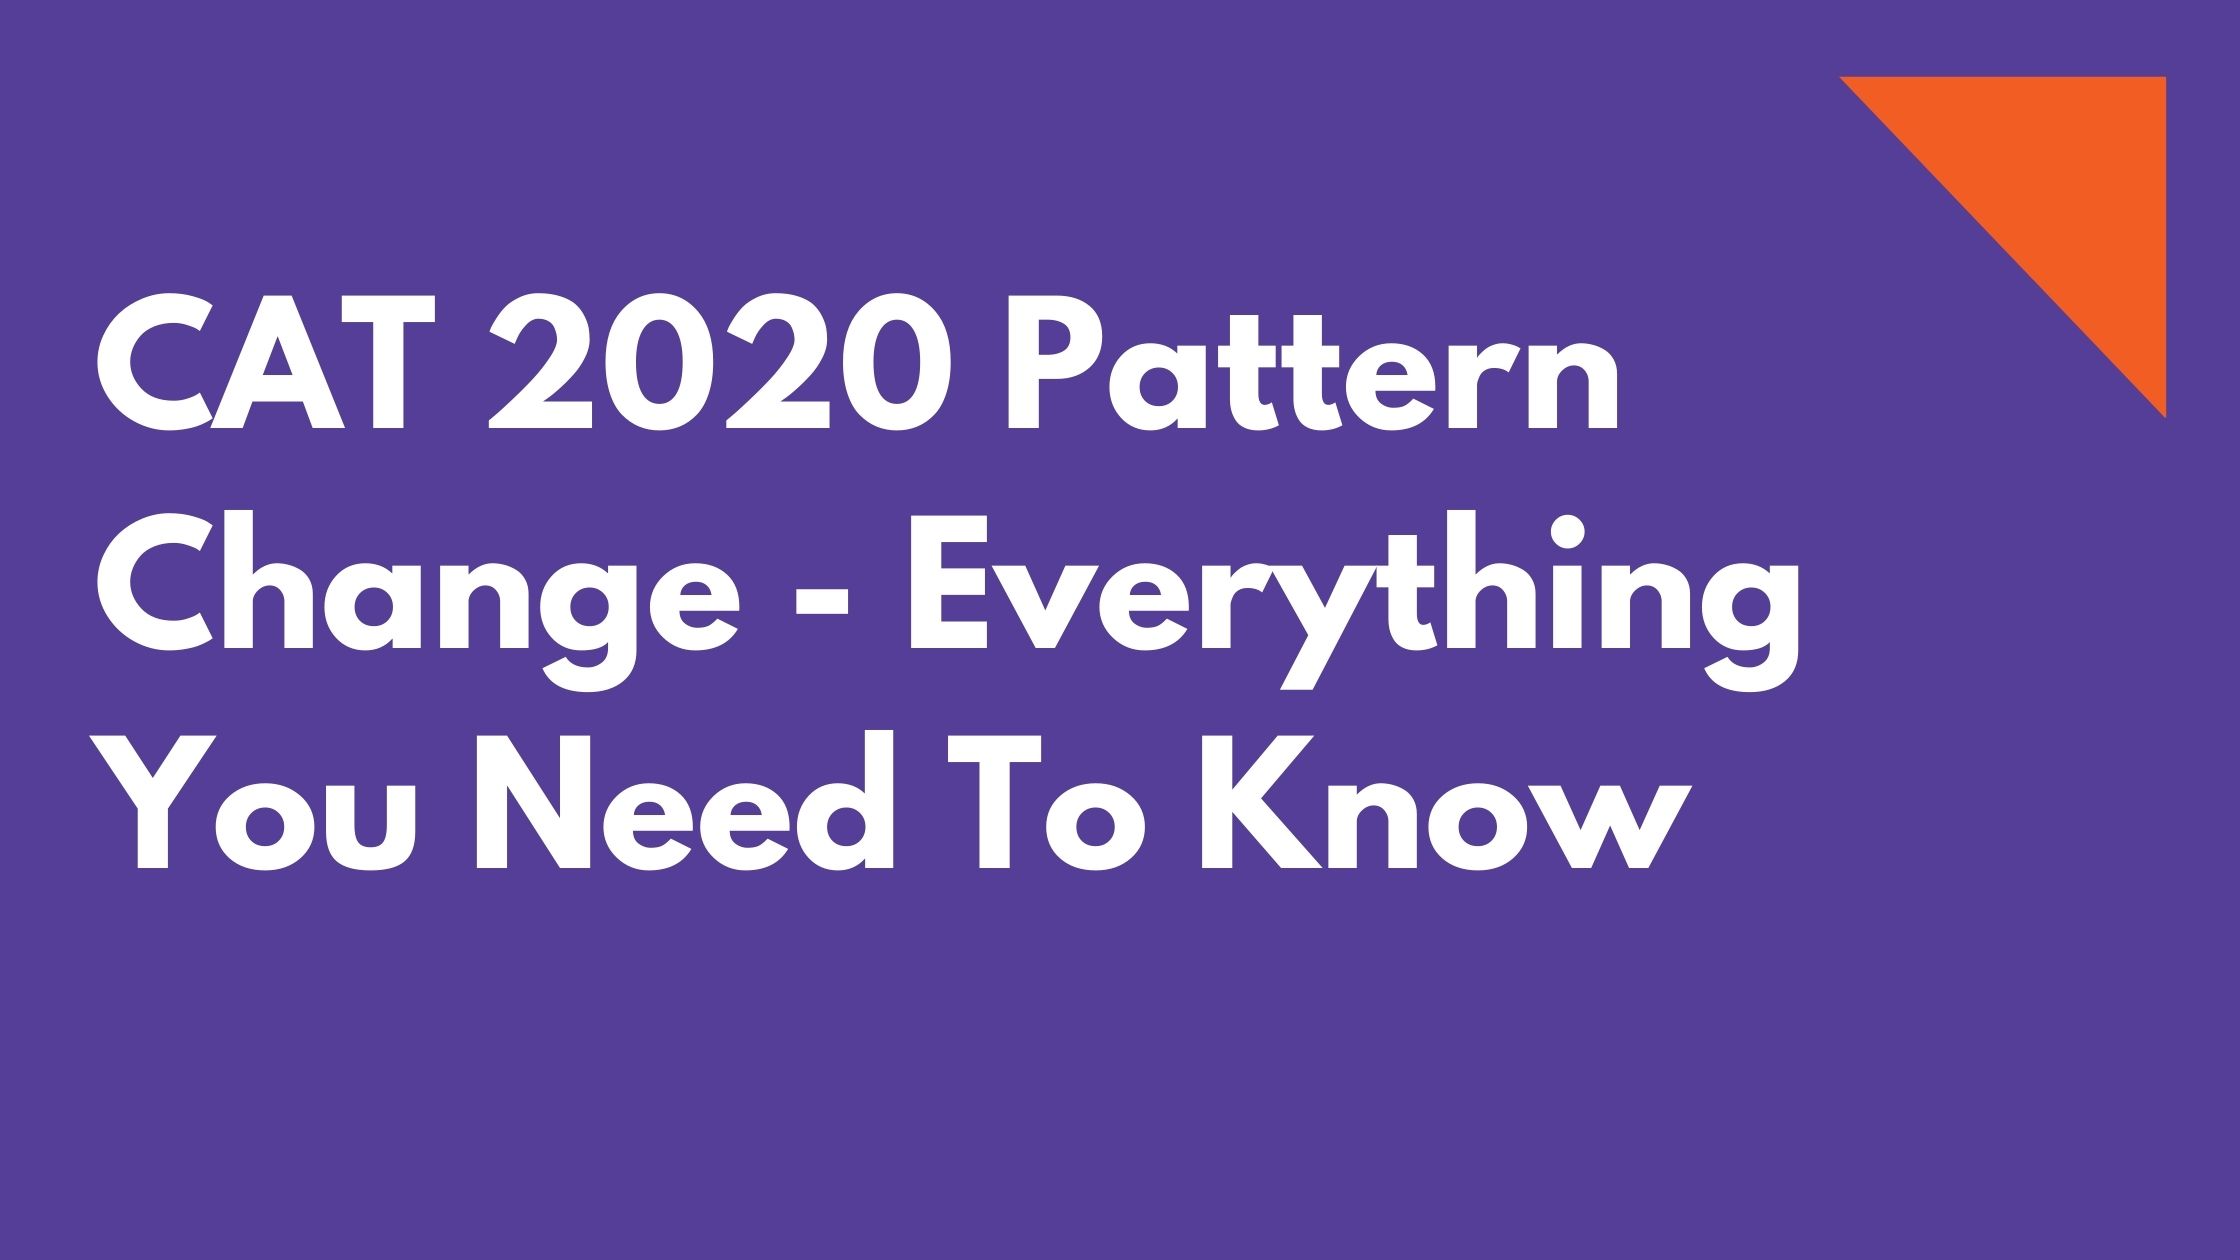 New CAT pattern 2020 – Everything You Need To Know